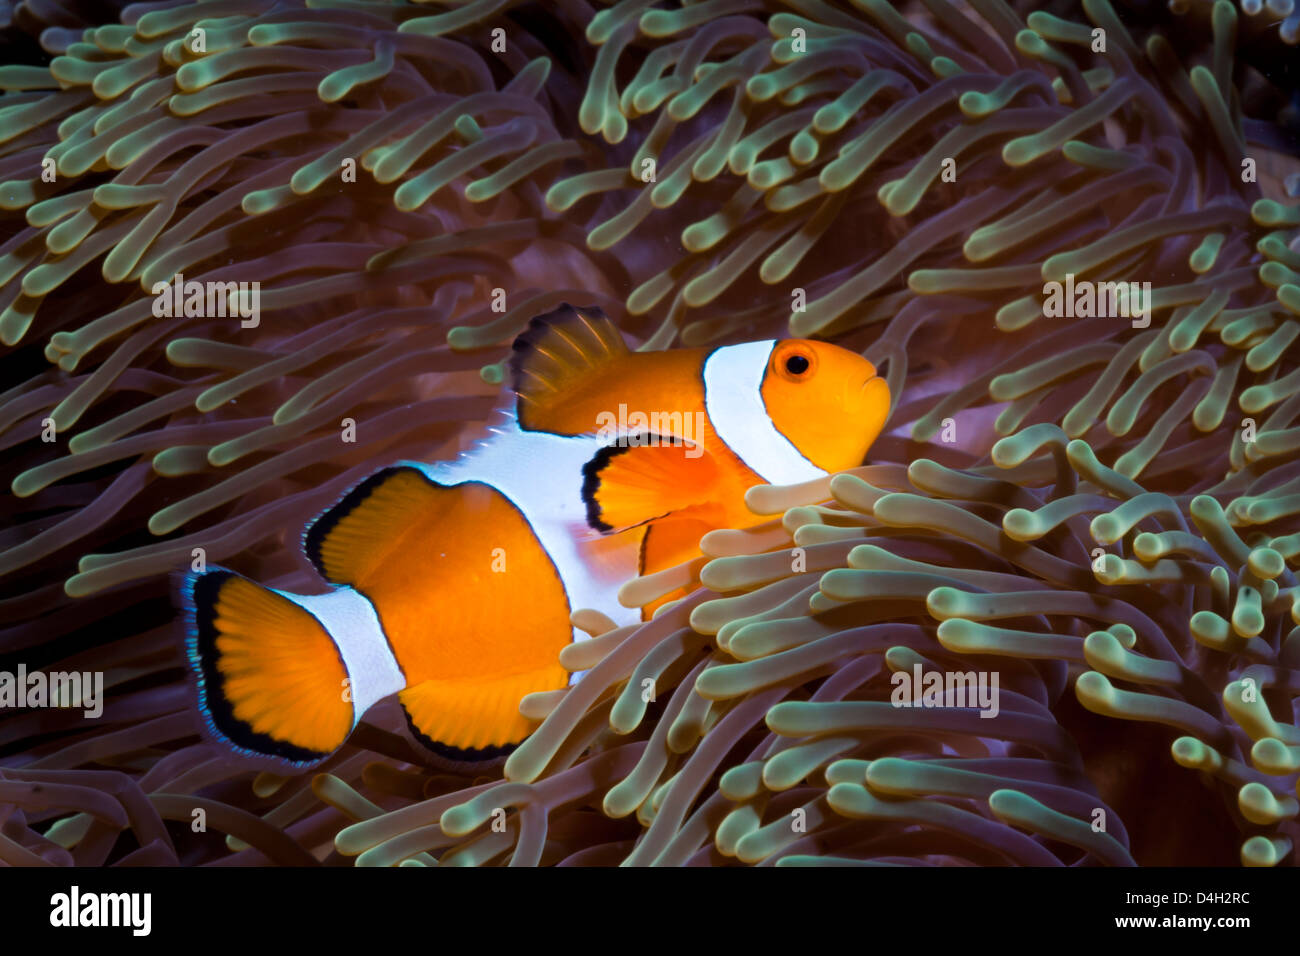 Western clown anemonefish and sea anemone (Heteractis magnifica), Southern Thailand, Andaman Sea, Indian Ocean, Southeast Asia Stock Photo